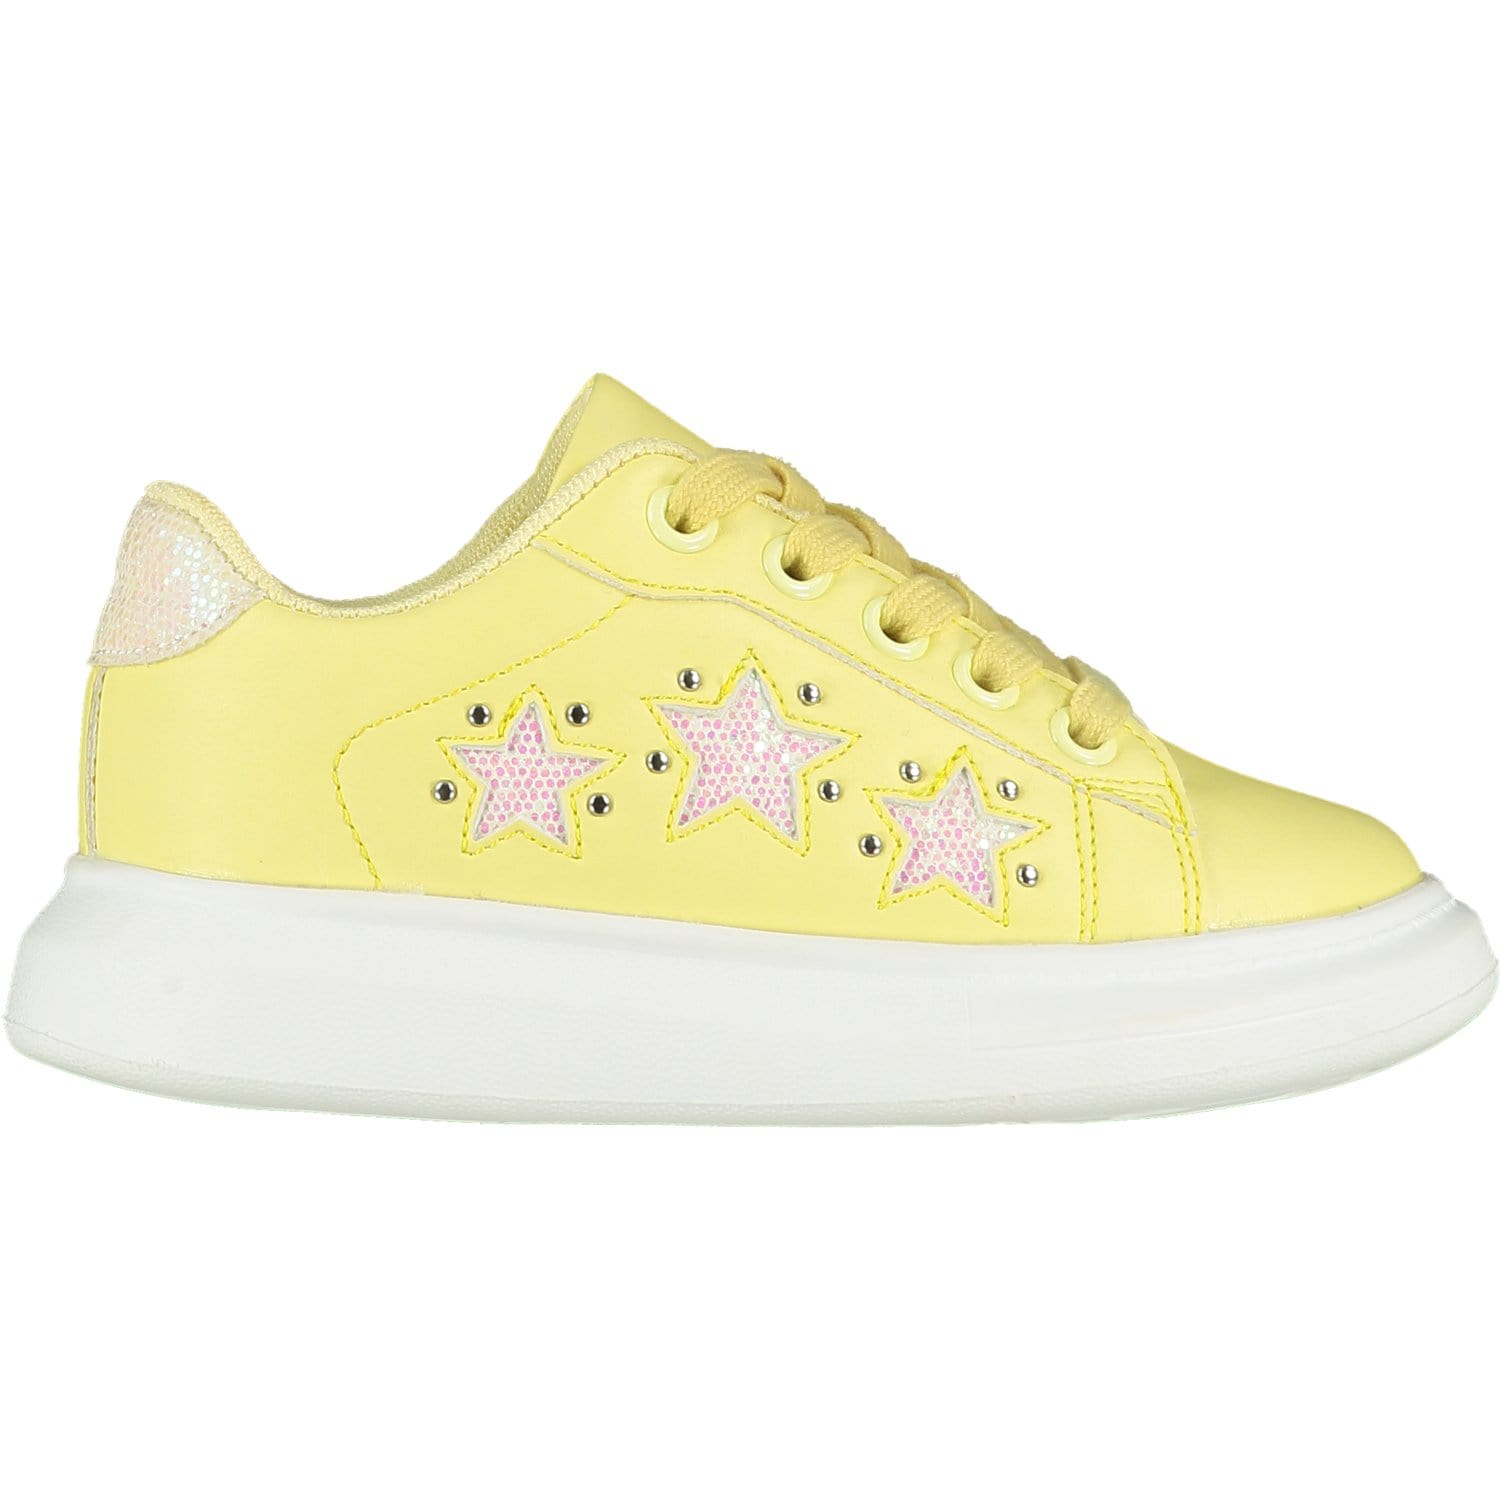 A DEE - Queeny Chunky Star Trainer - Lemon